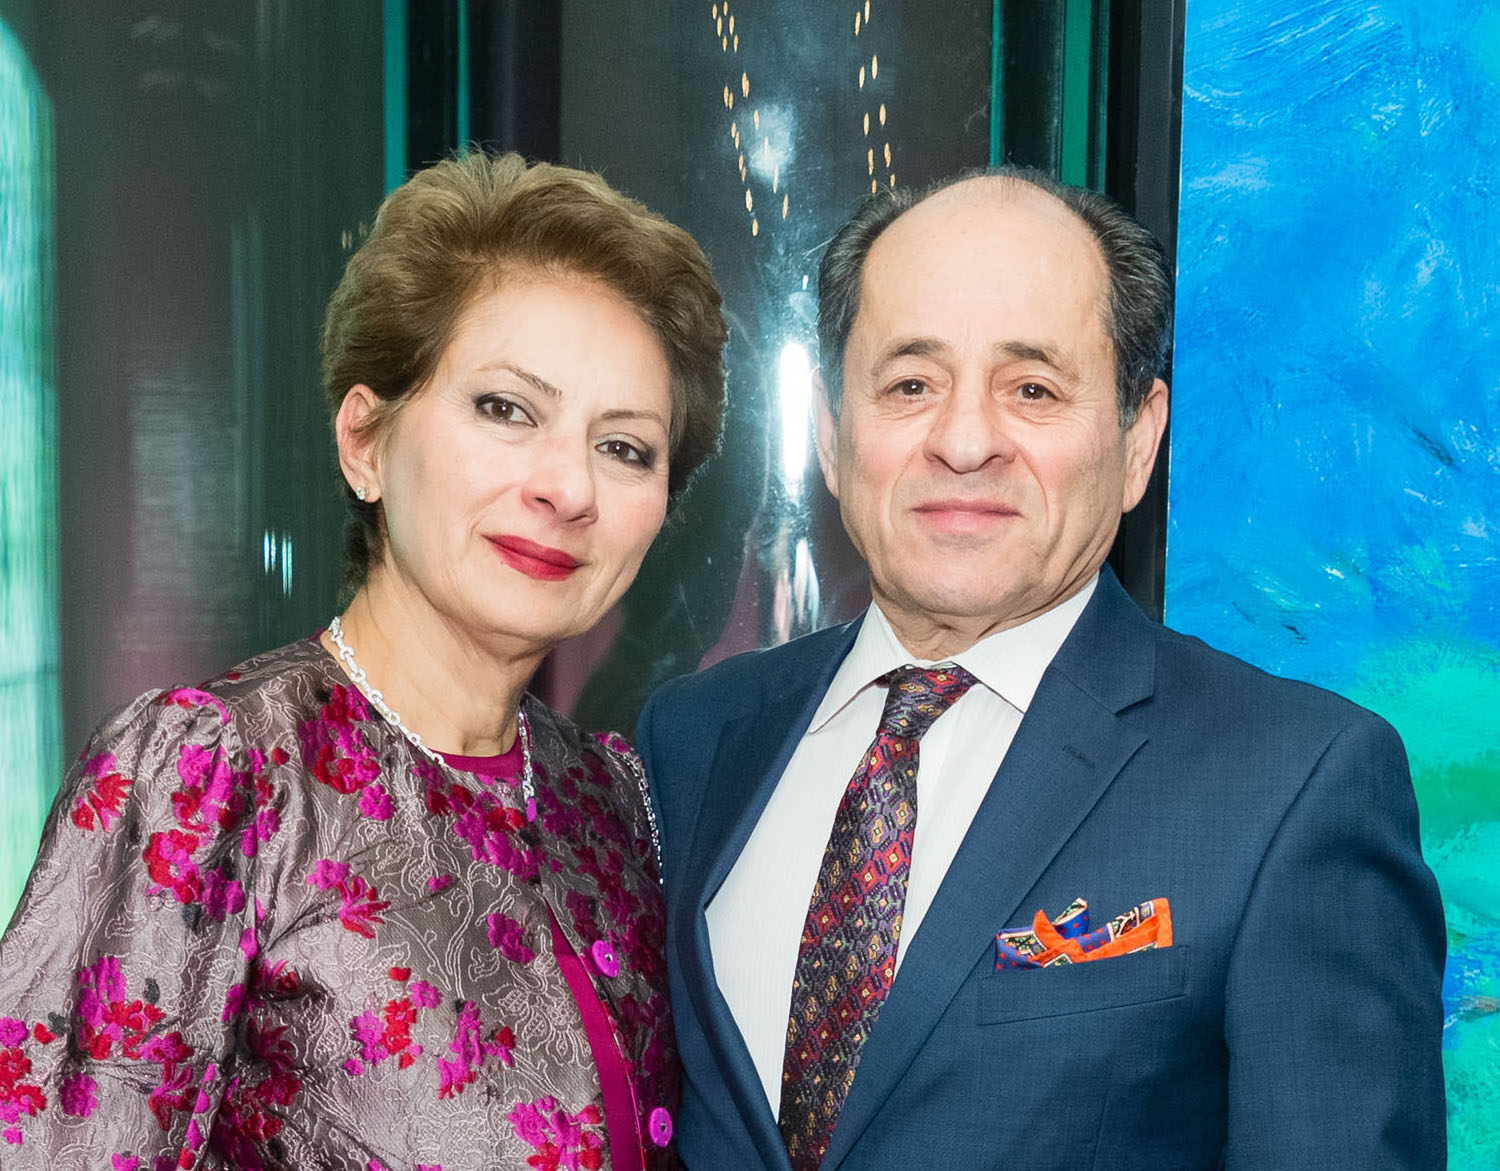 A man dressed in a blue suit and tie stands next to a woman wearing a silver and pink dress as they look at the camera for a posed portrait.